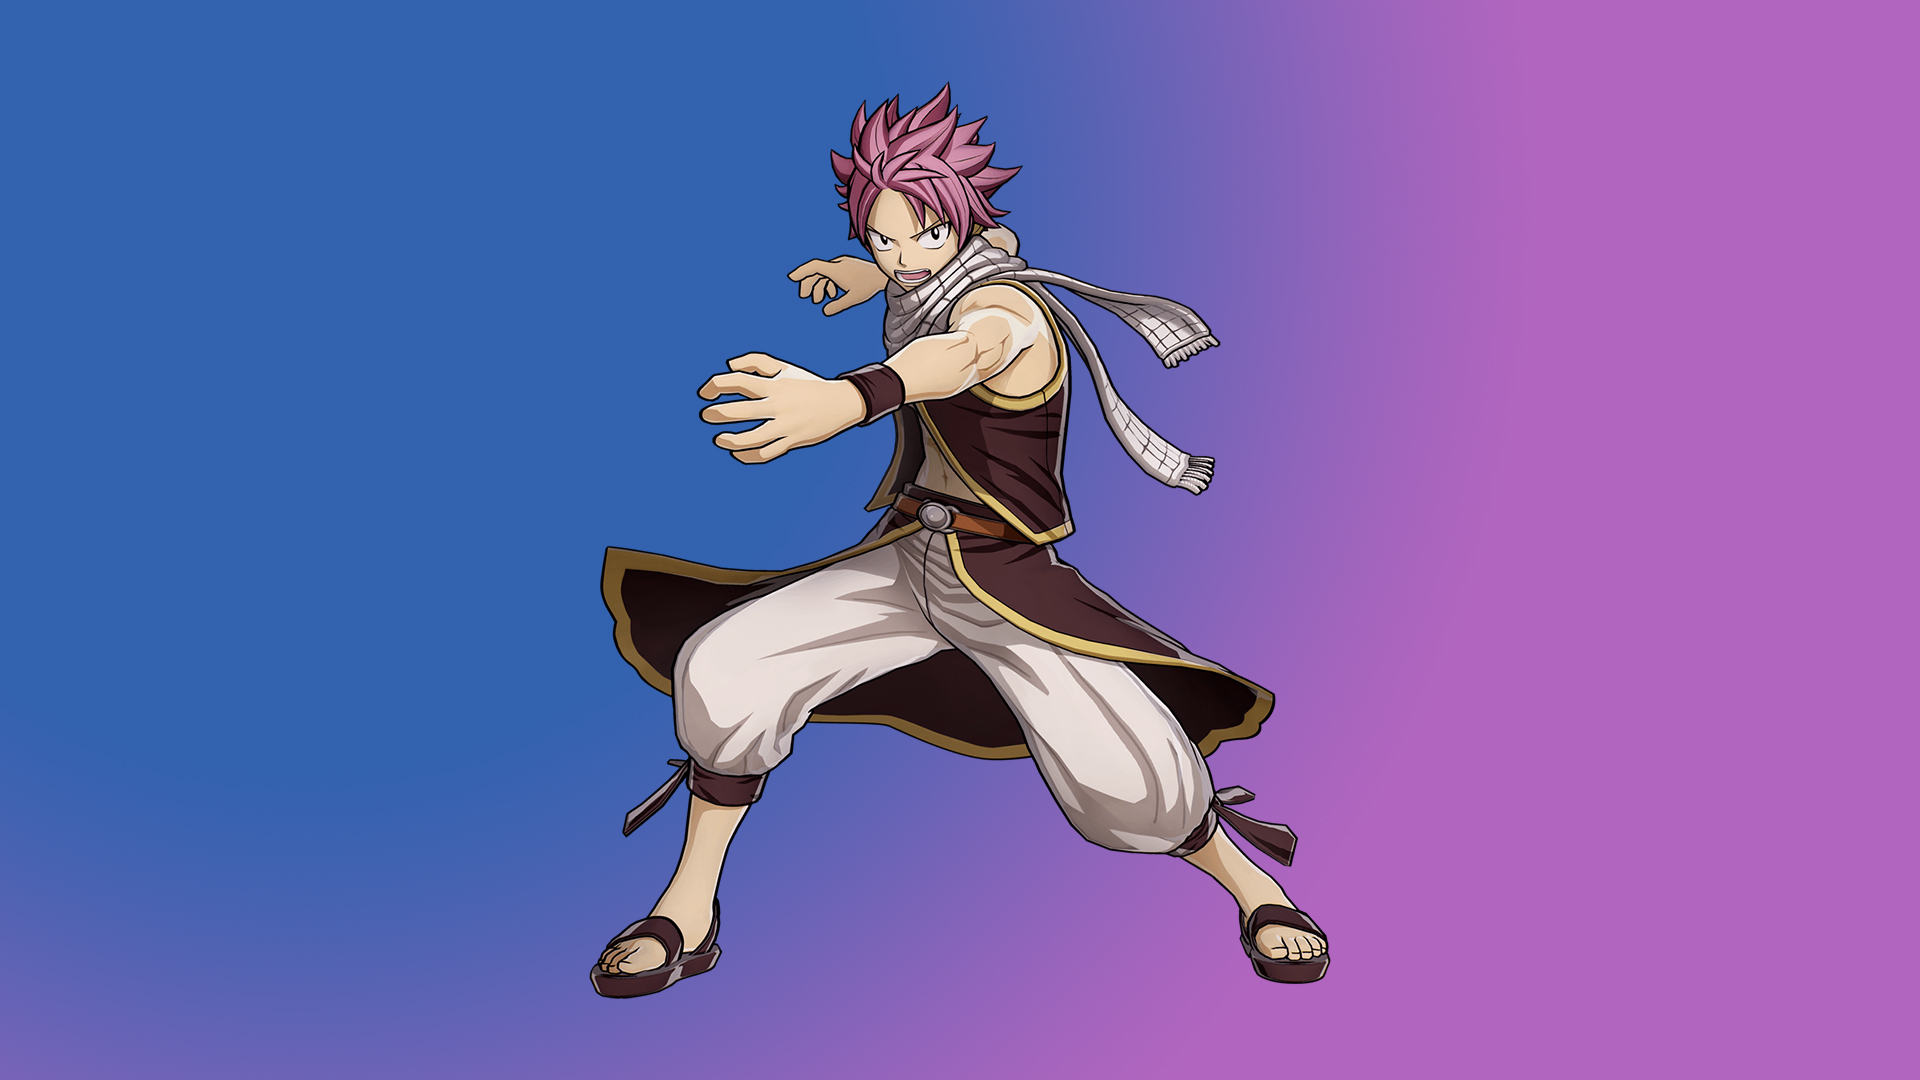 Natsu Dragneel In Fairy Tail Game